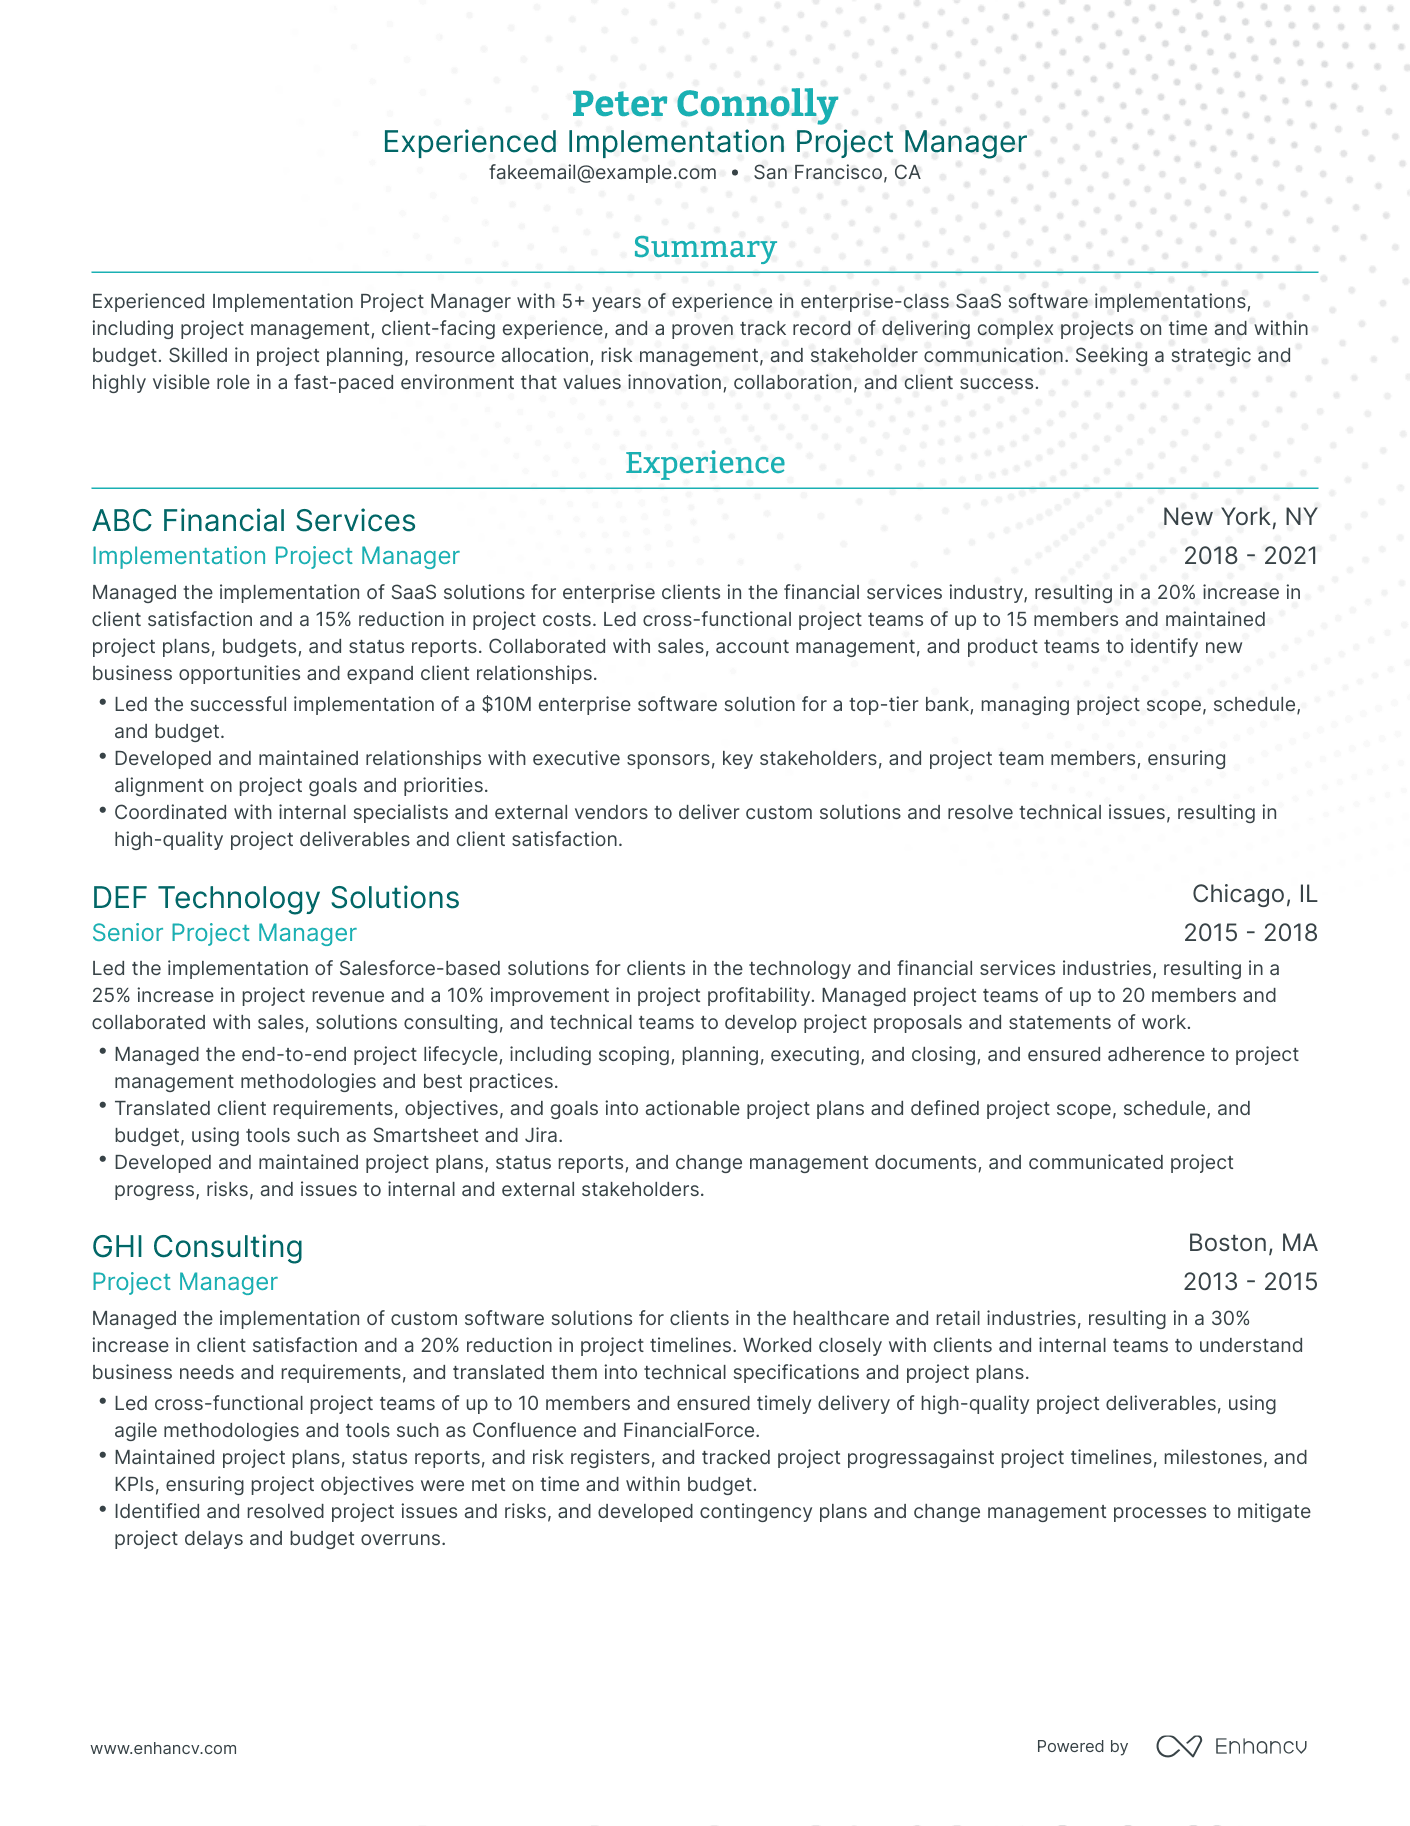 Traditional Implementation Project Manager Resume Template